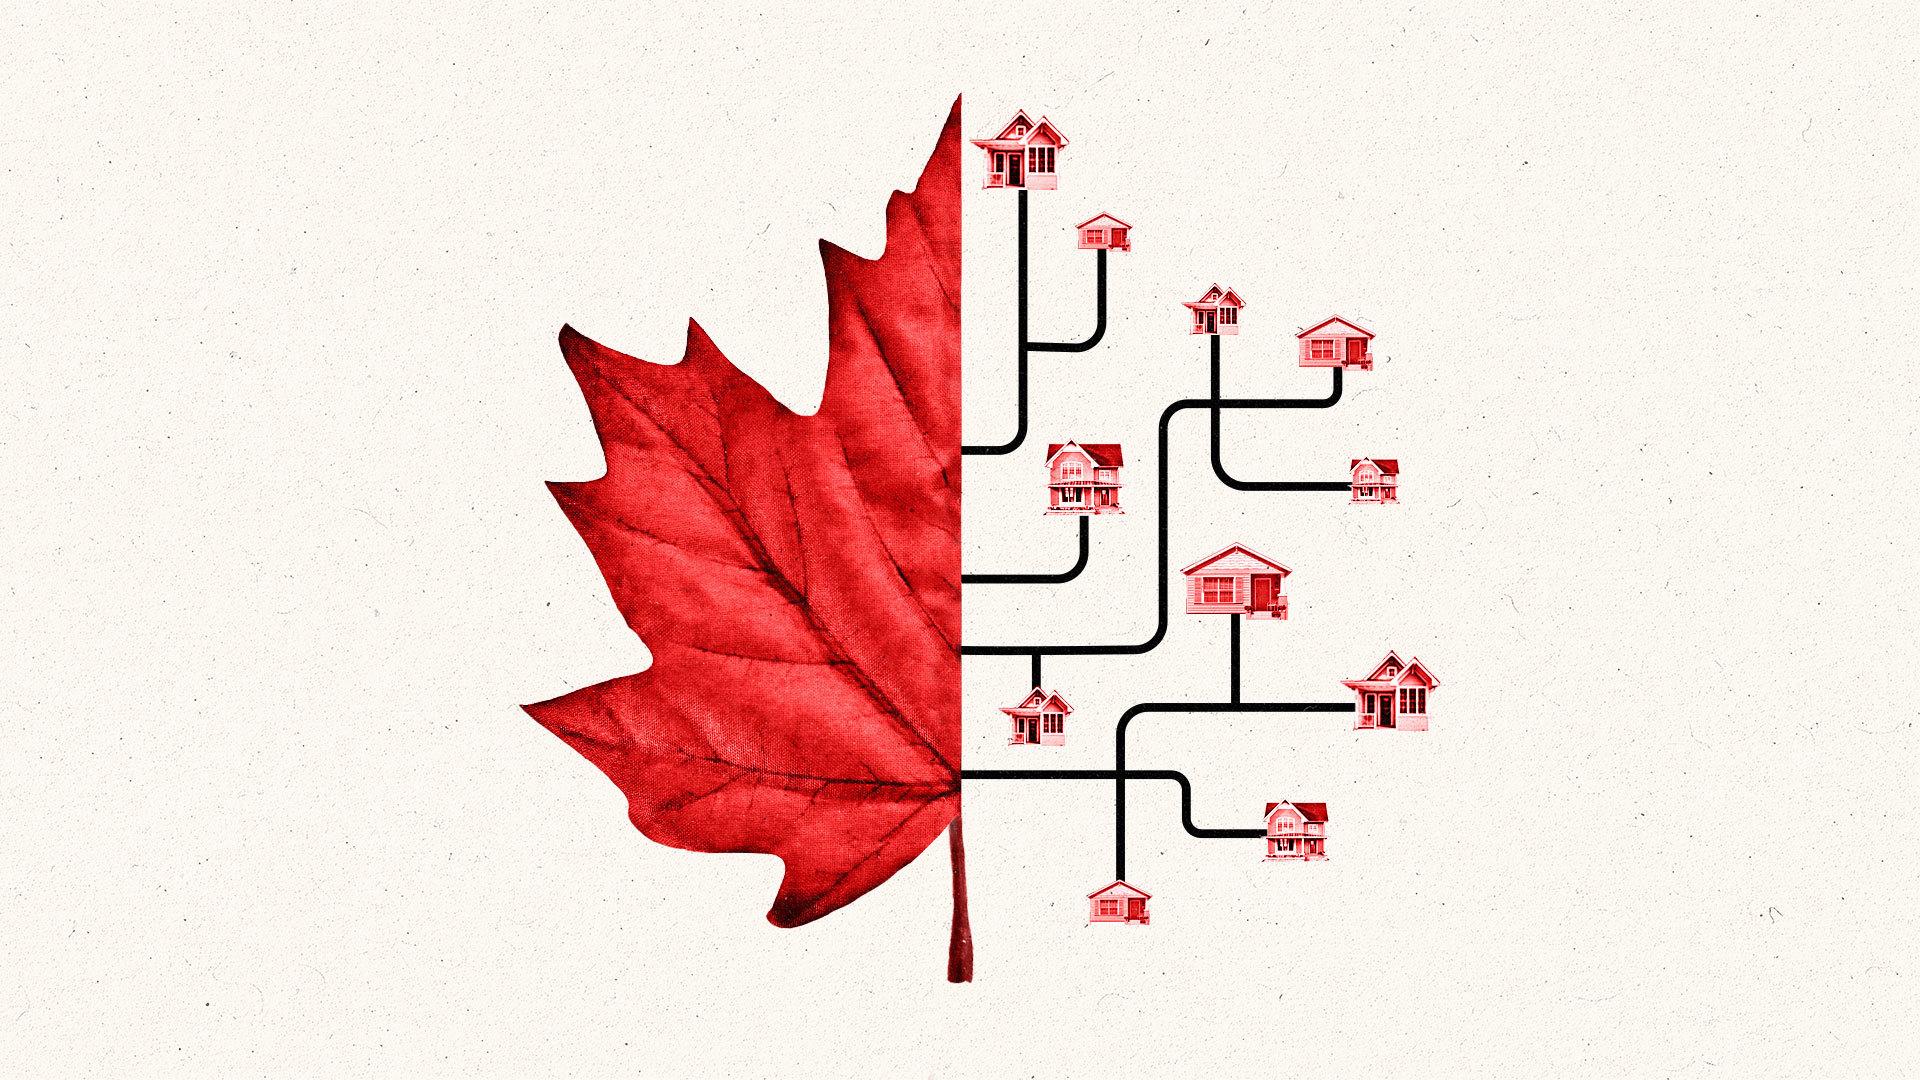 Left half of a red maple leaf joined with imagery of vein-like data lines leading to little houses representing the right half